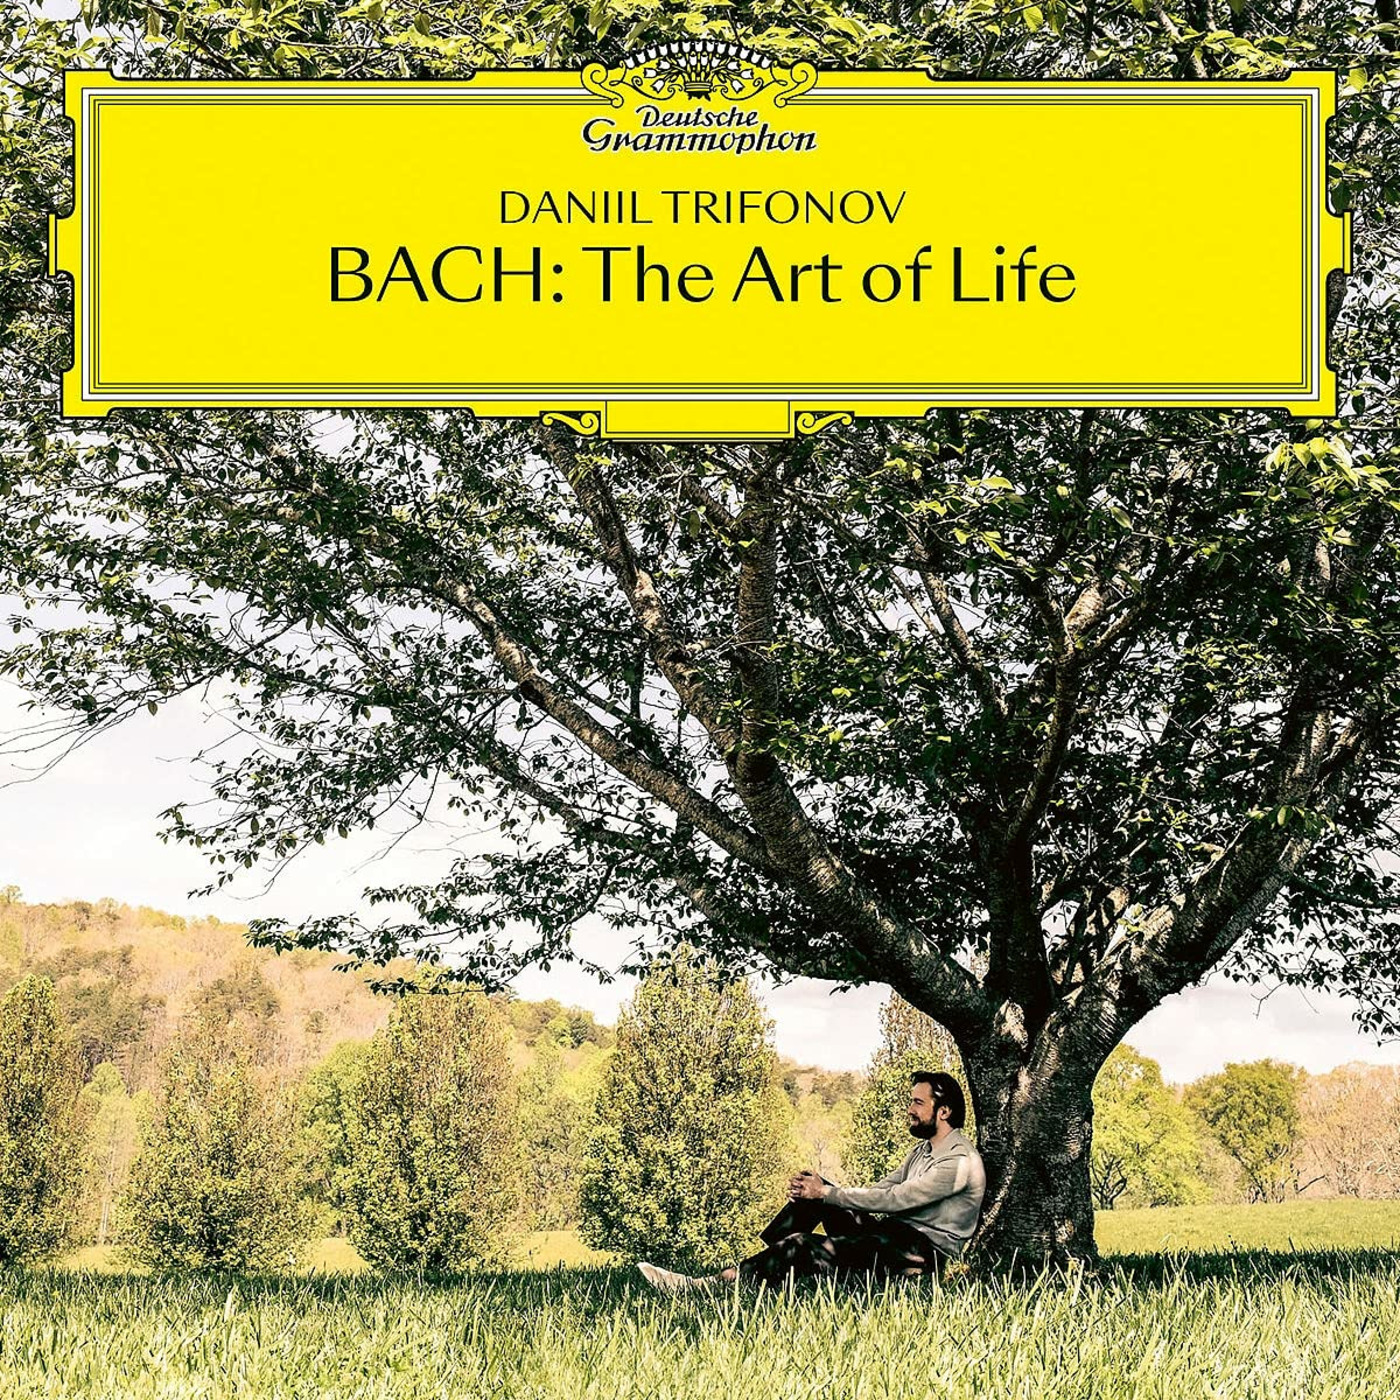 Episode 218: 18218 Bach - The Art of Life